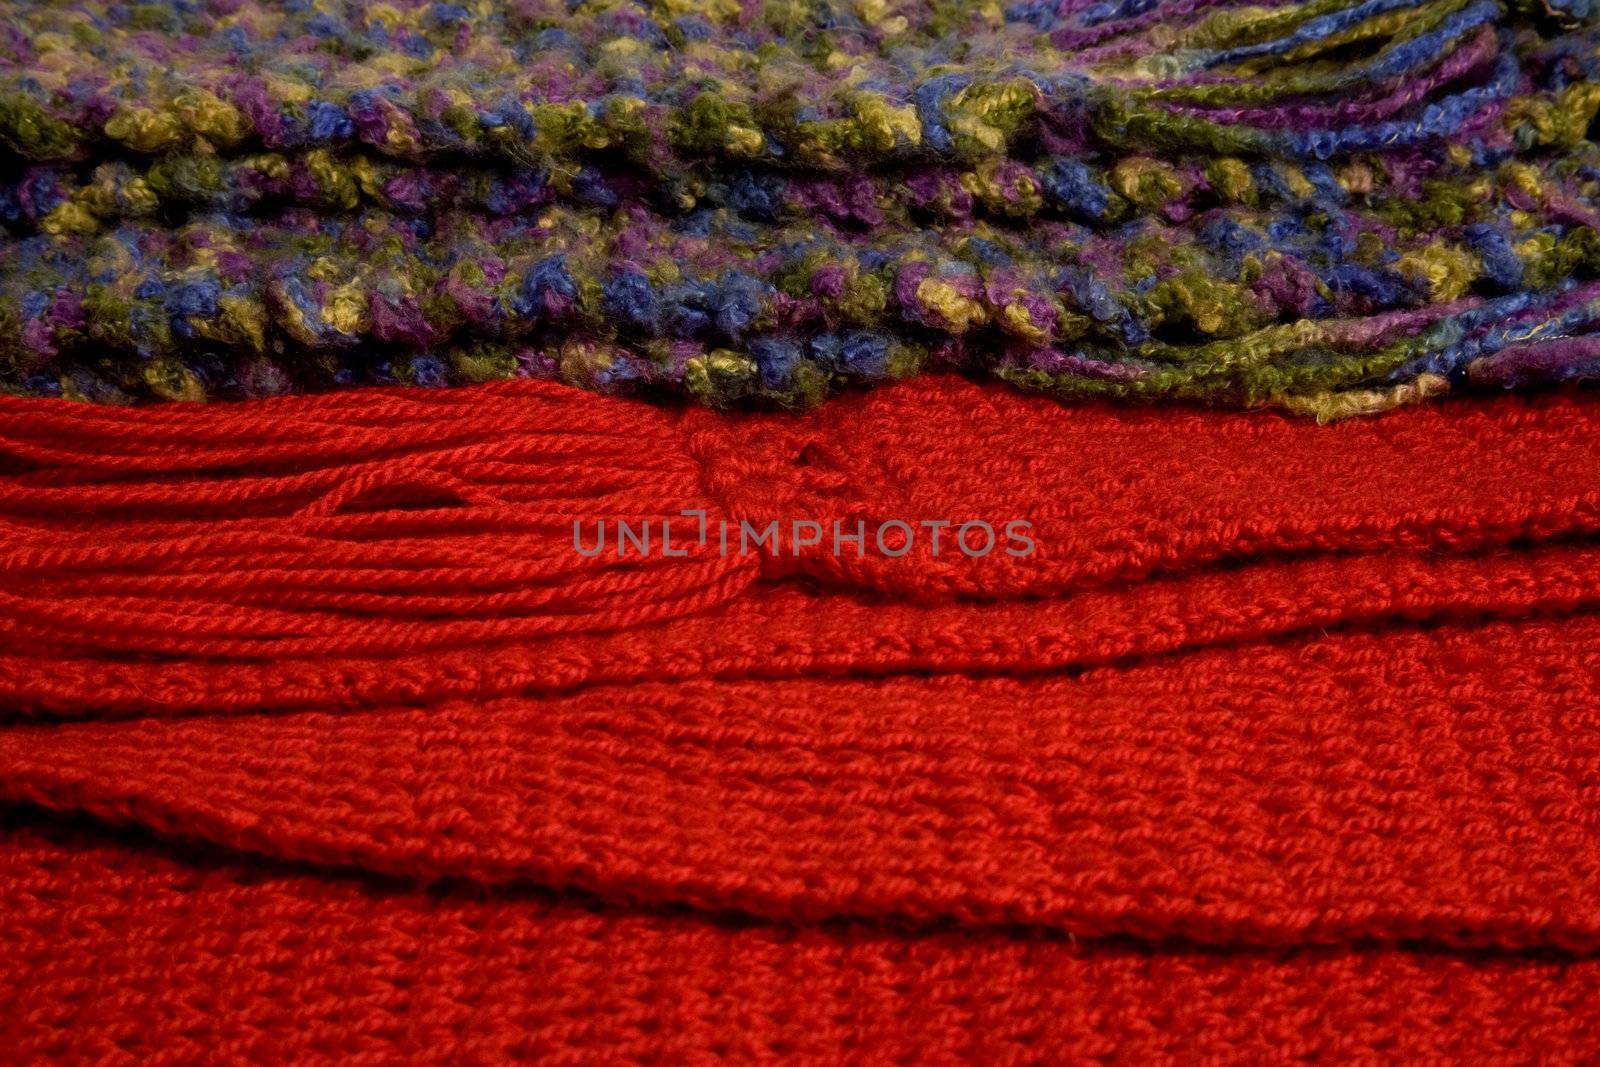 Close-up of two colorful wool scarfs